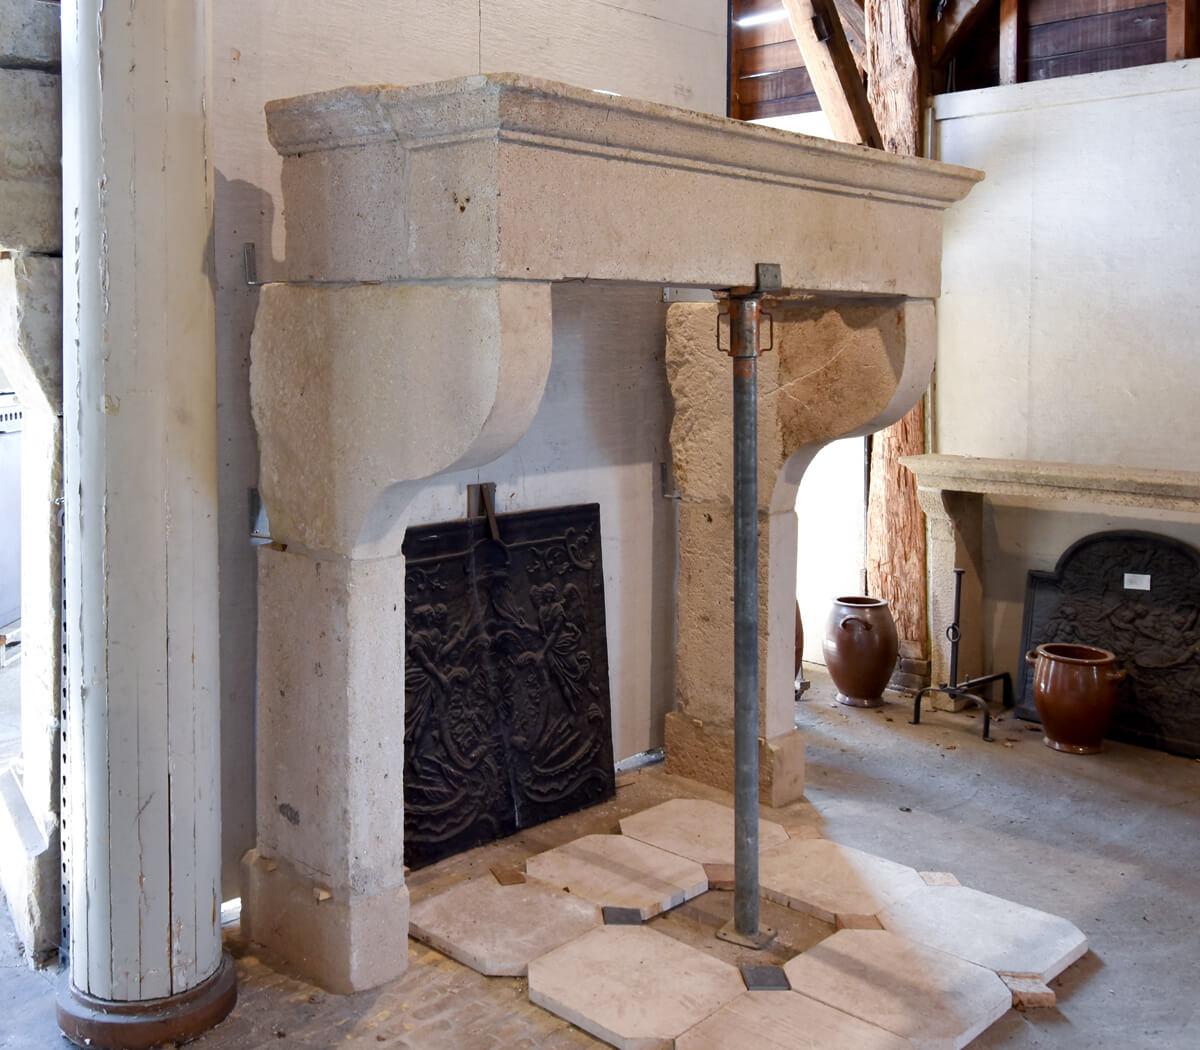 Antique sandstone fireplace mantel from the 19th Century.
To place around the chimney. See at the last picture all
dimensions of the fireplace.